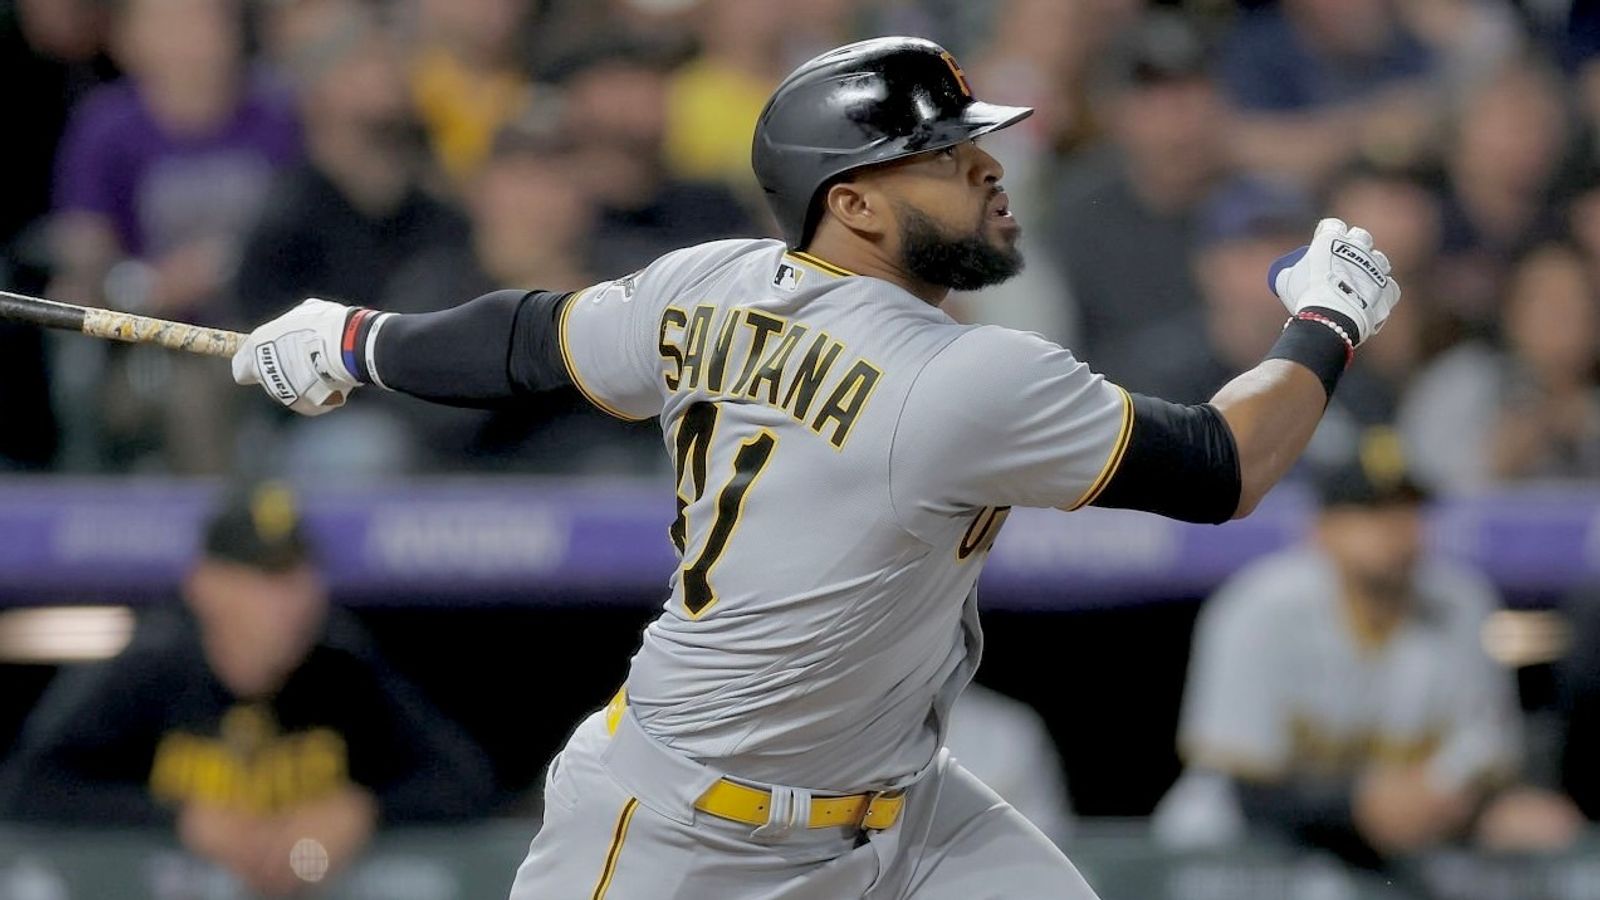 After huge night for bats, Pirates' message is 'we have to keep playing ...